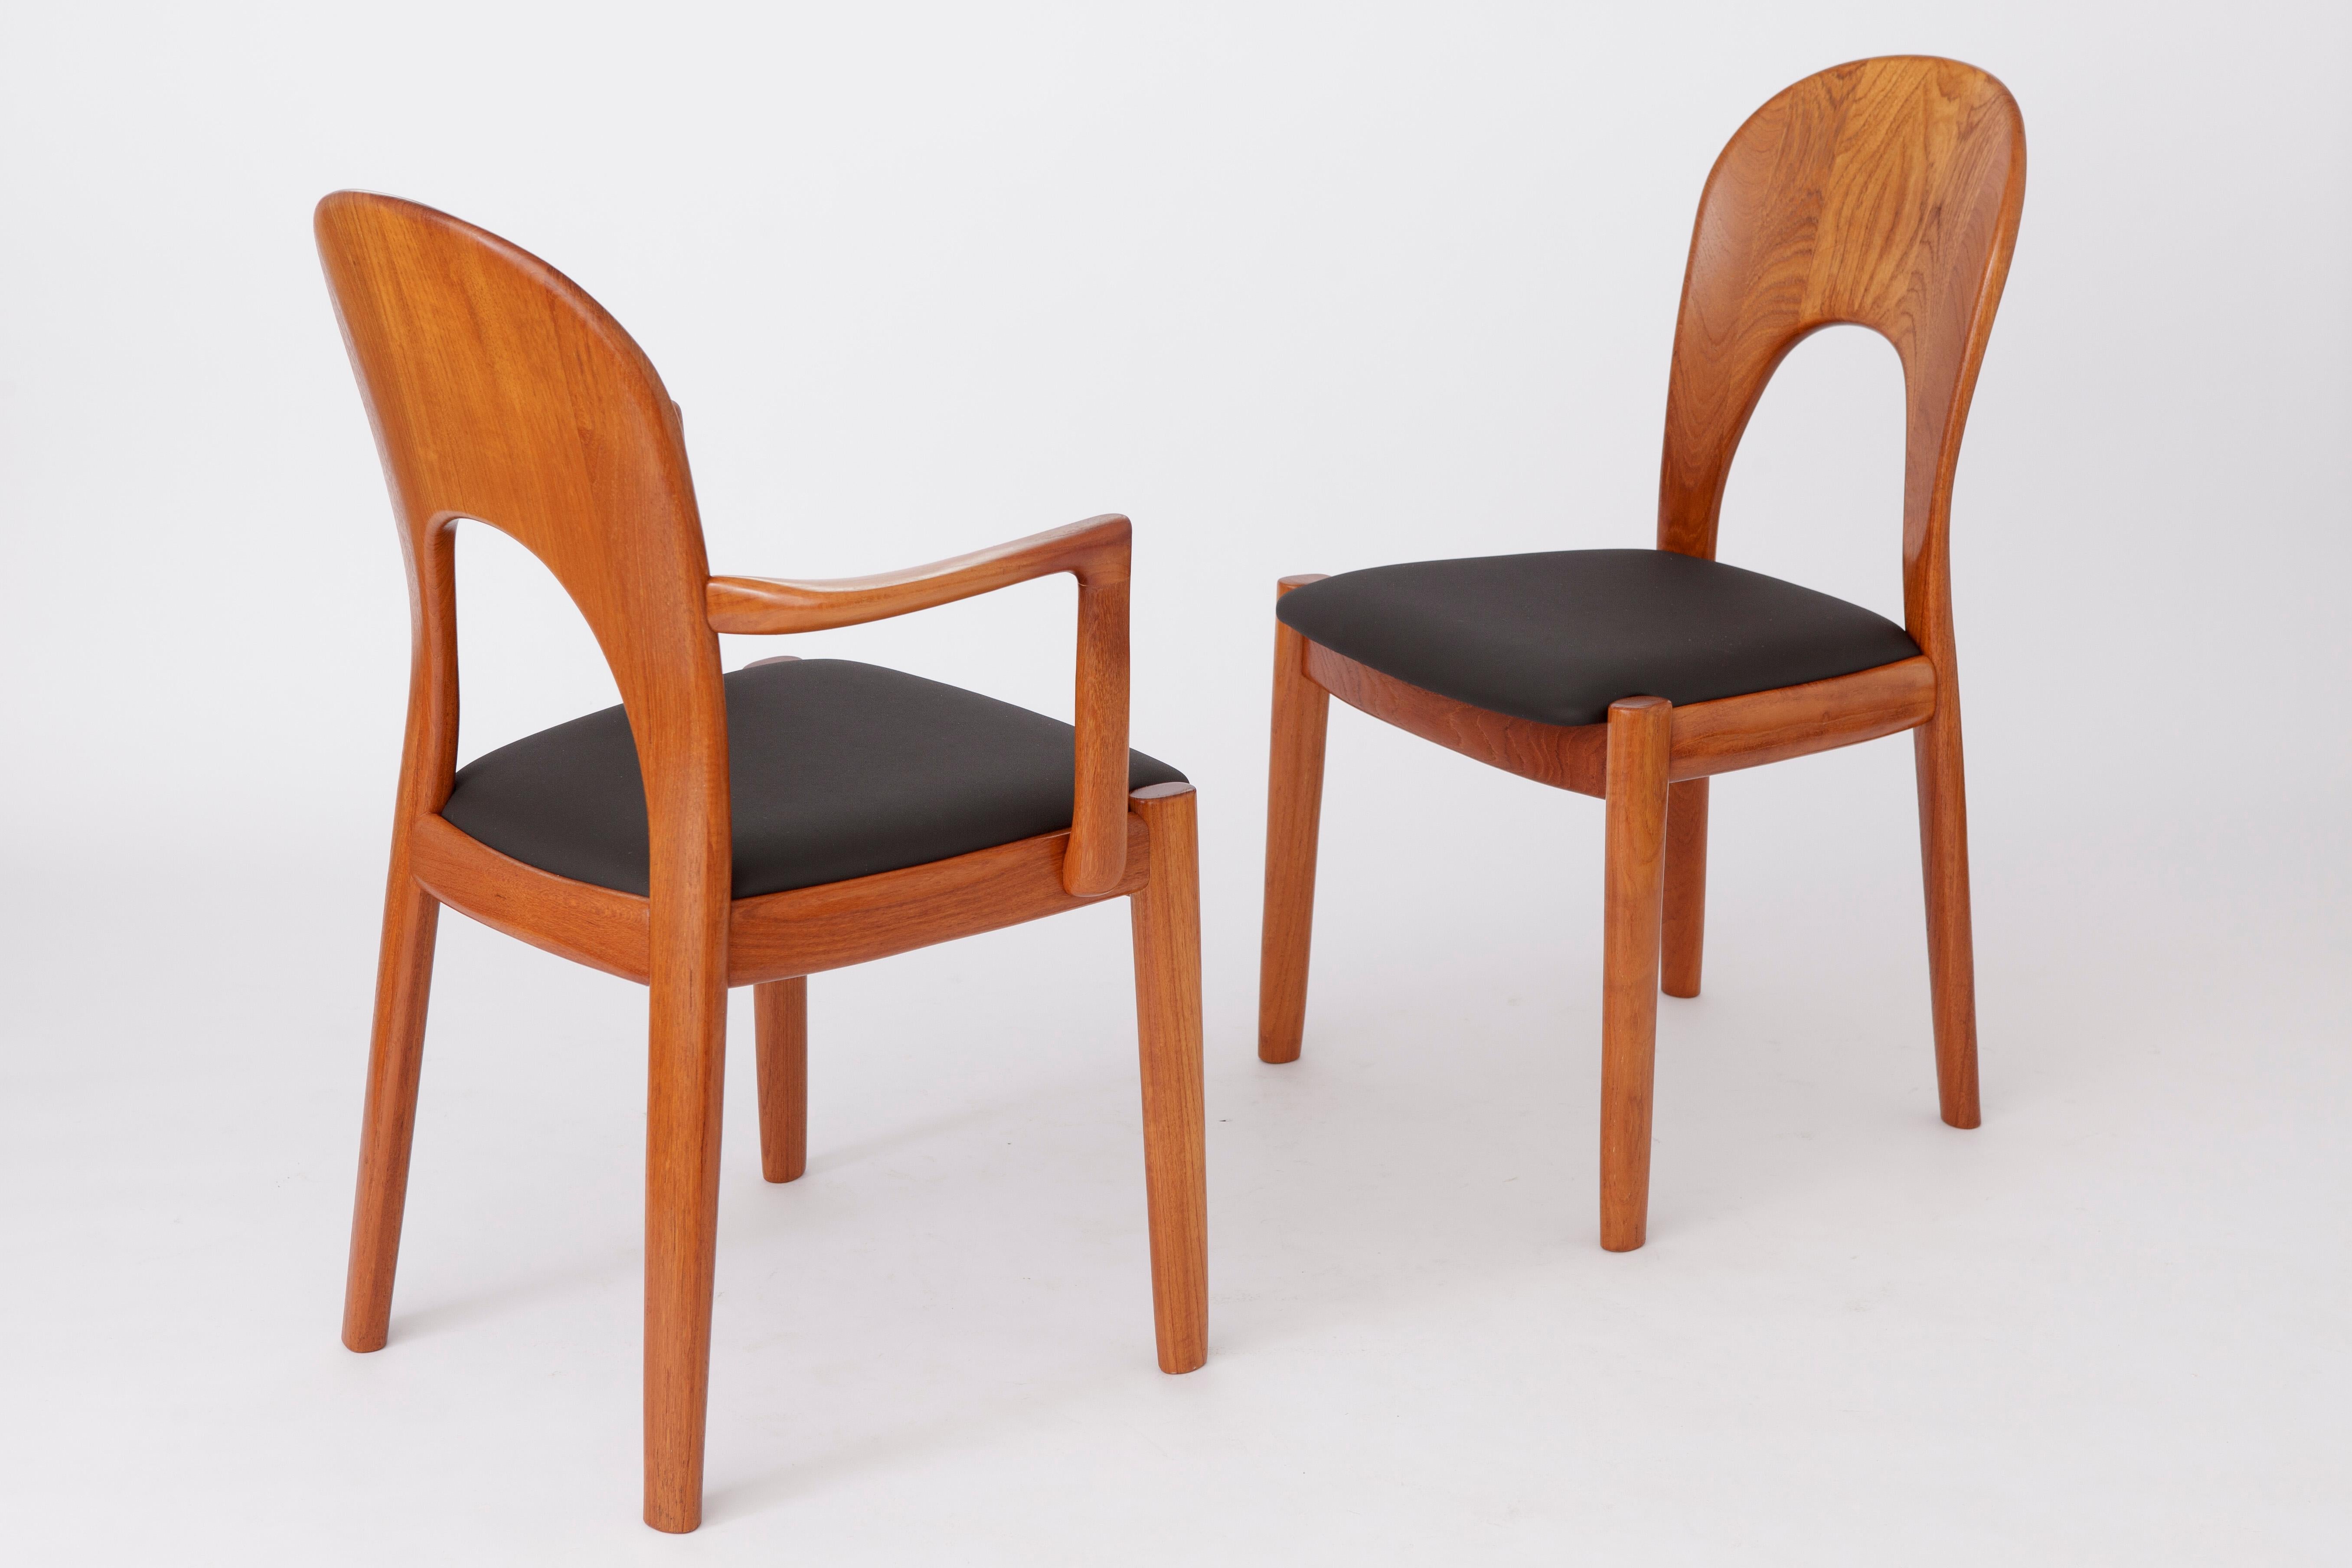 5 Vintage Chairs by Niels Koefoed 1960s Danish Teak In Good Condition For Sale In Hannover, DE